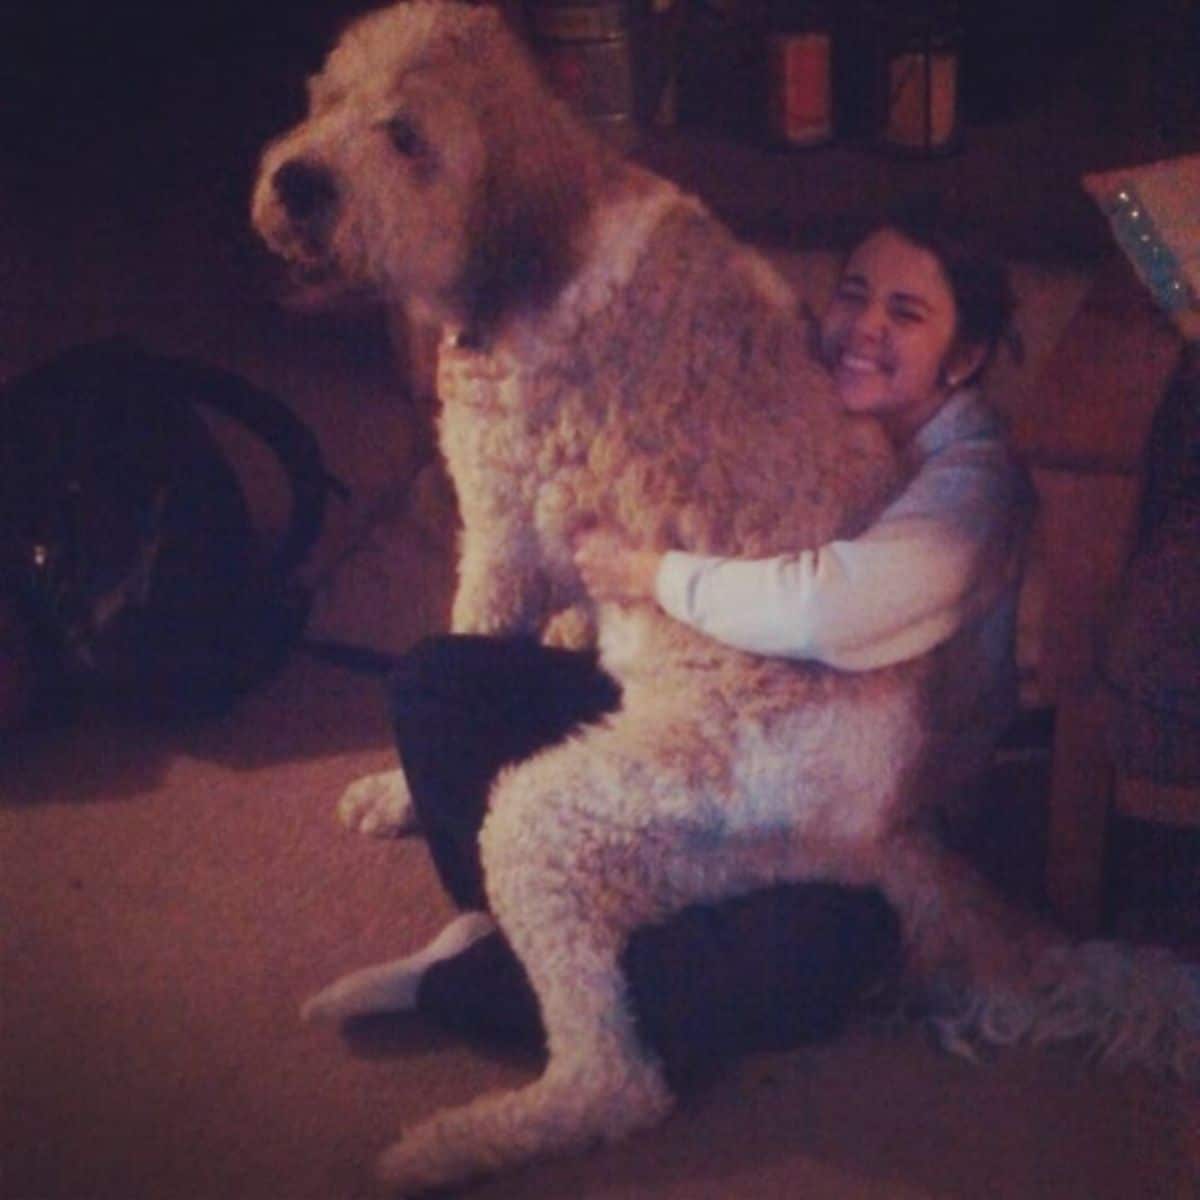 brown and white poodle sitting on a woman's lap